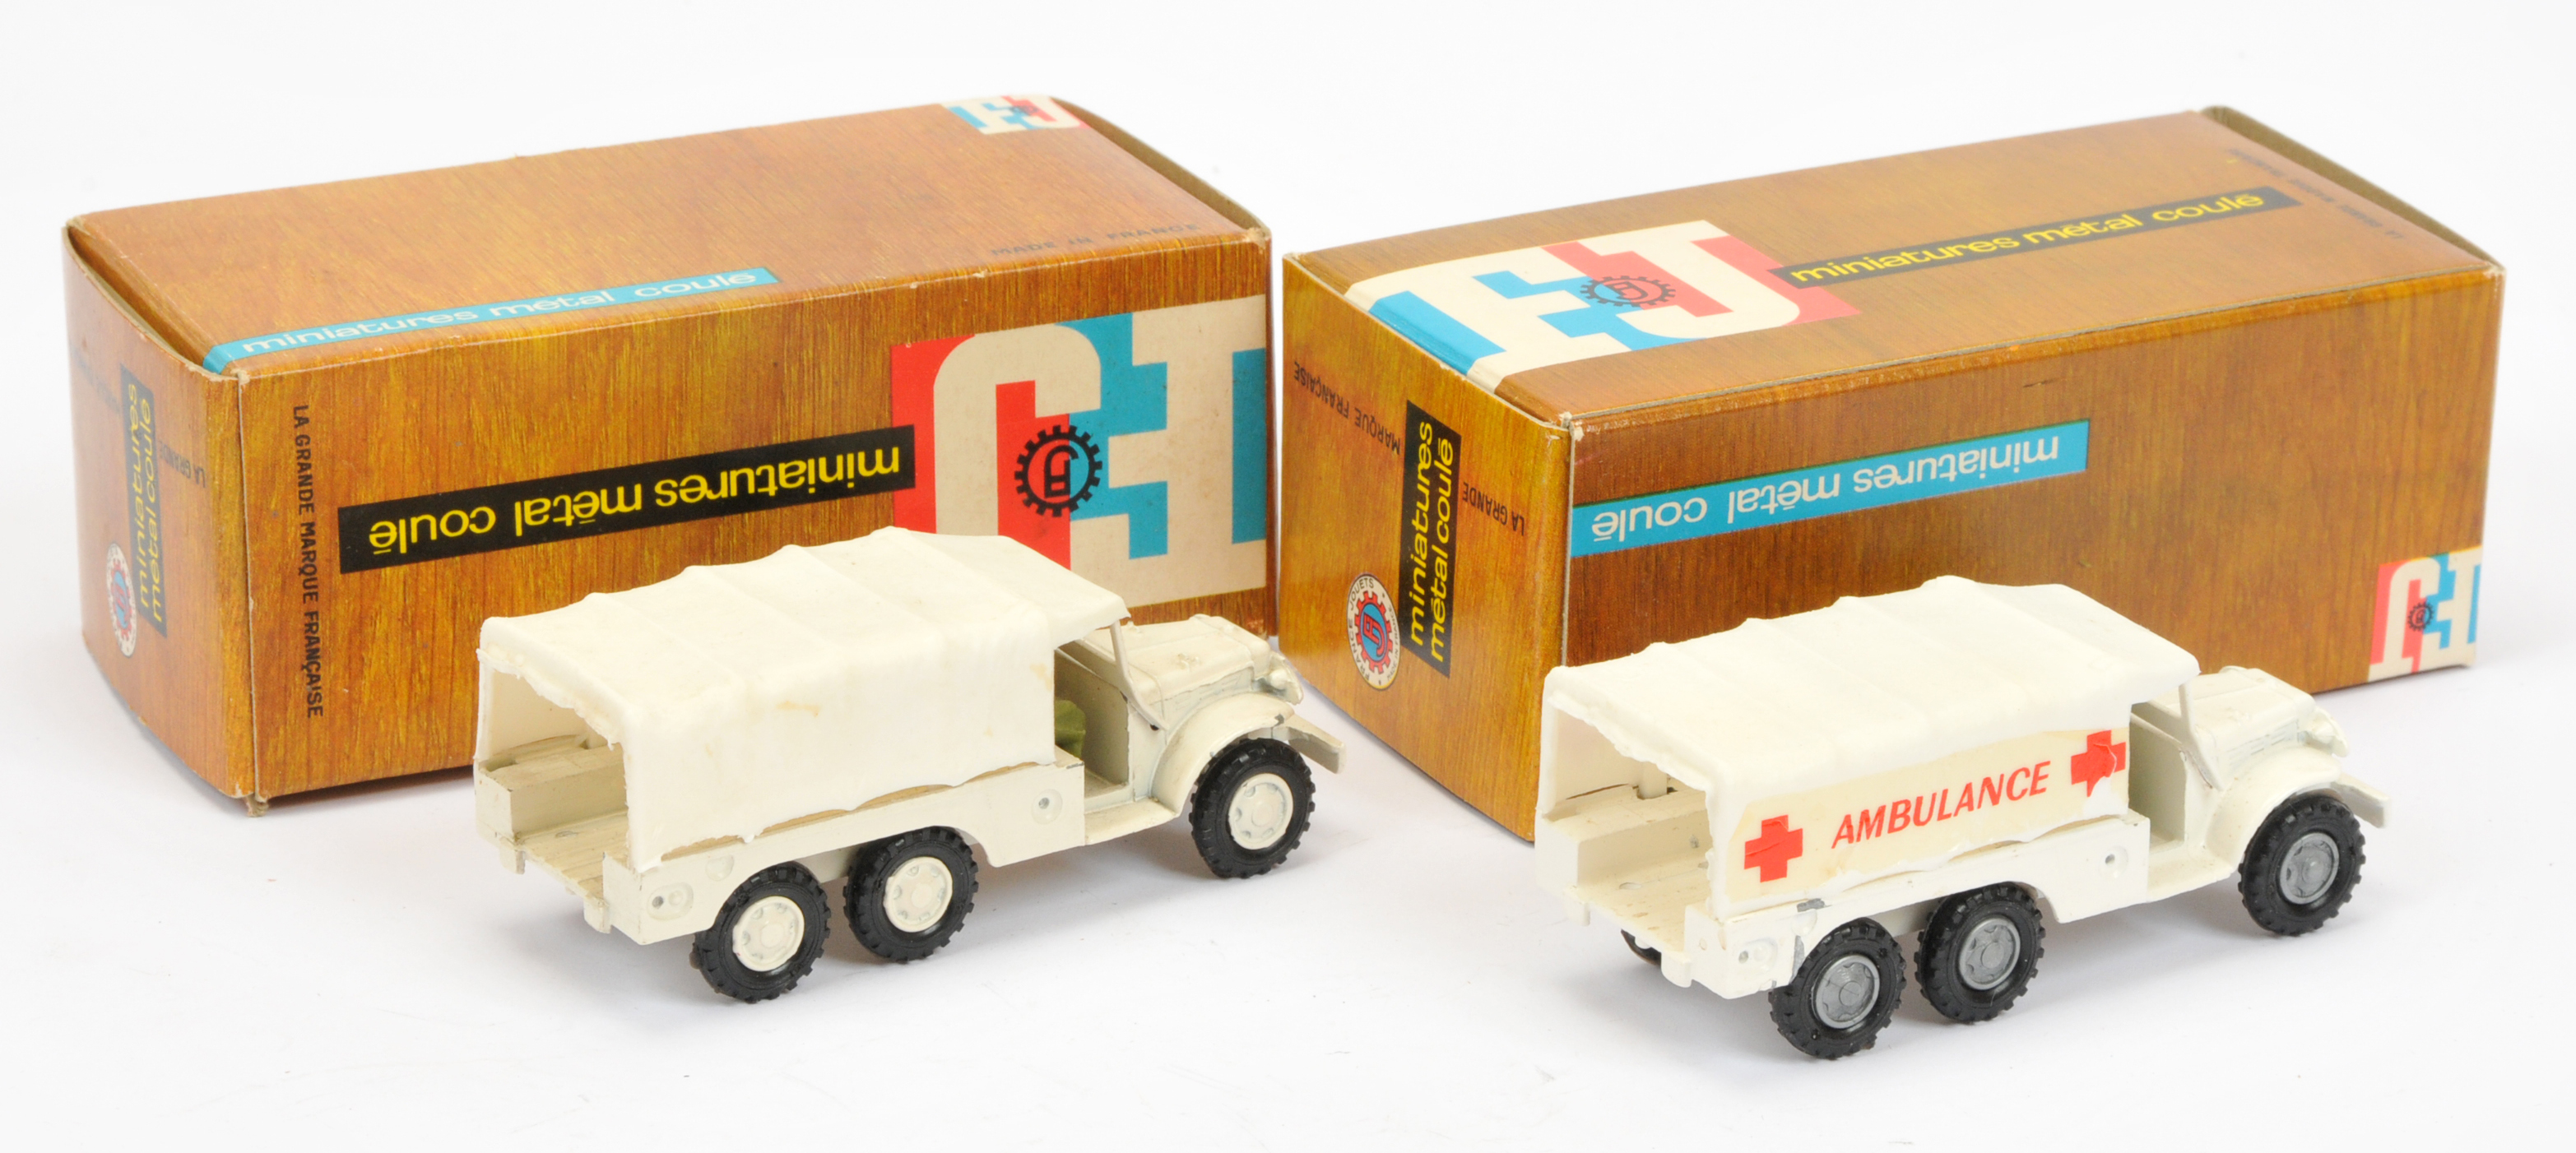 FJ Military a pair  - (1) GMC covered lorry - white including hubs and  (2) same but "Ambulance" - Image 2 of 2